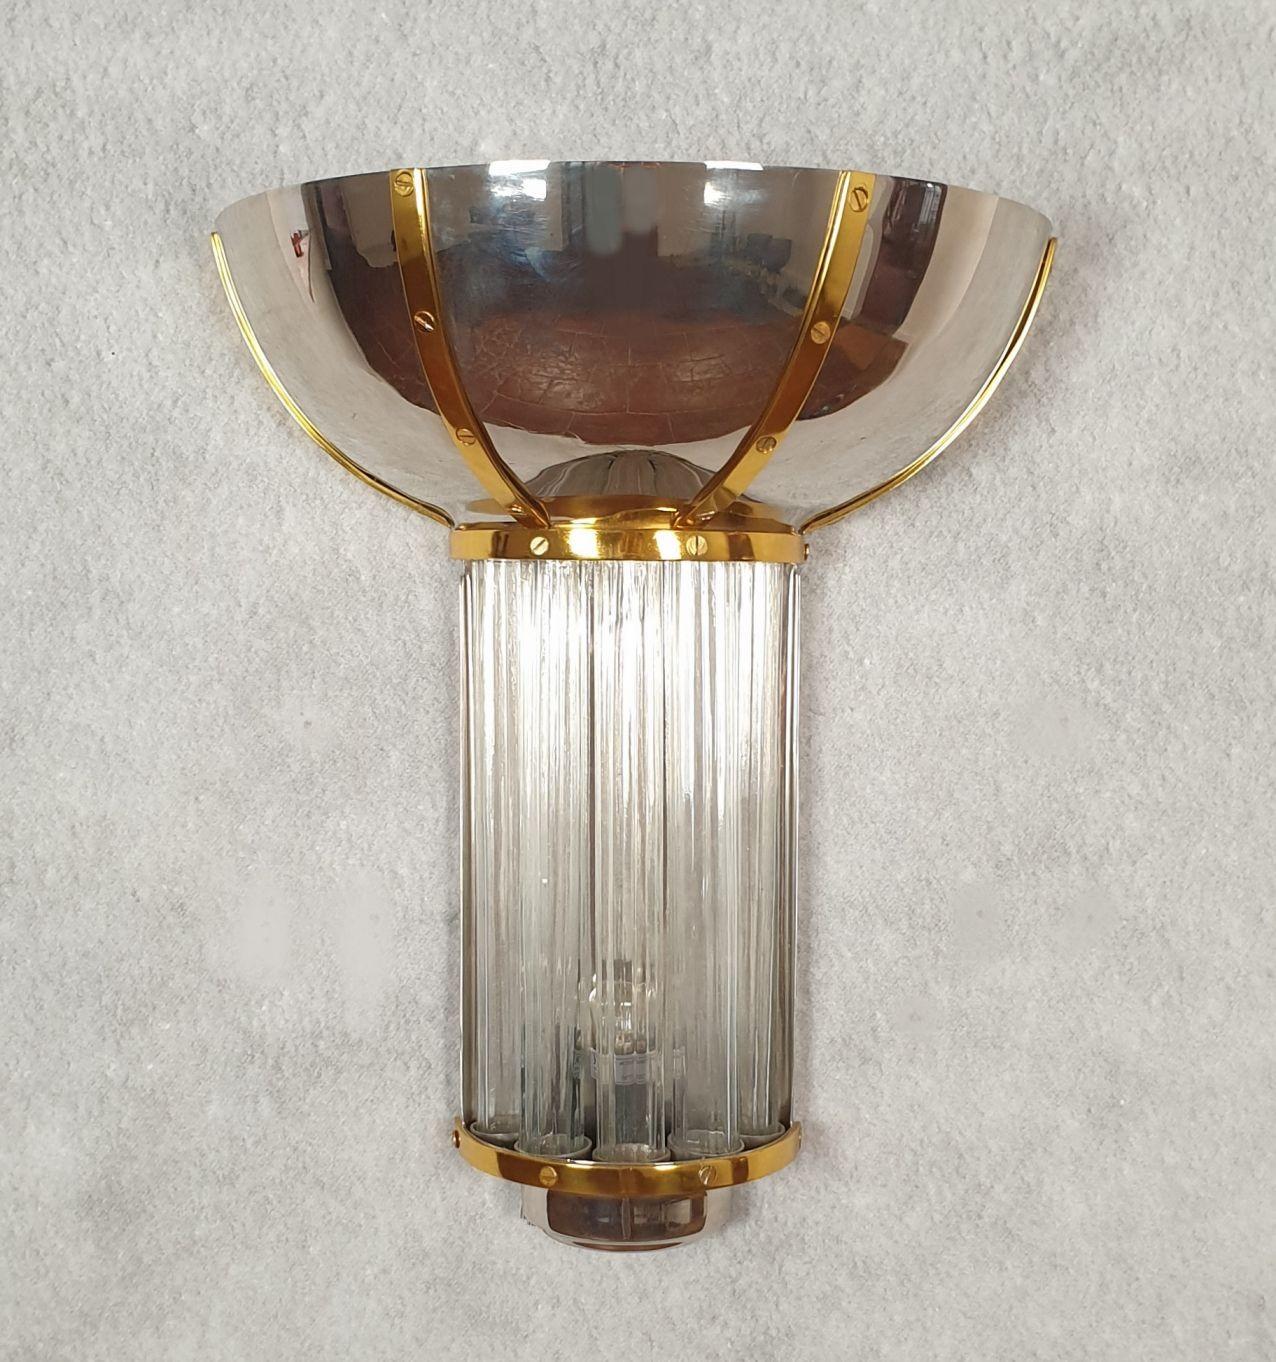 Large Mid Century wall sconces, attributed to Jean Perzel, France circa 1960 or earlier.
Set of ten sconces available. Sold and priced by pair.
The vintage sconces are made of chrome, brass and glass tubes.
They have a light behind the tubes and 2